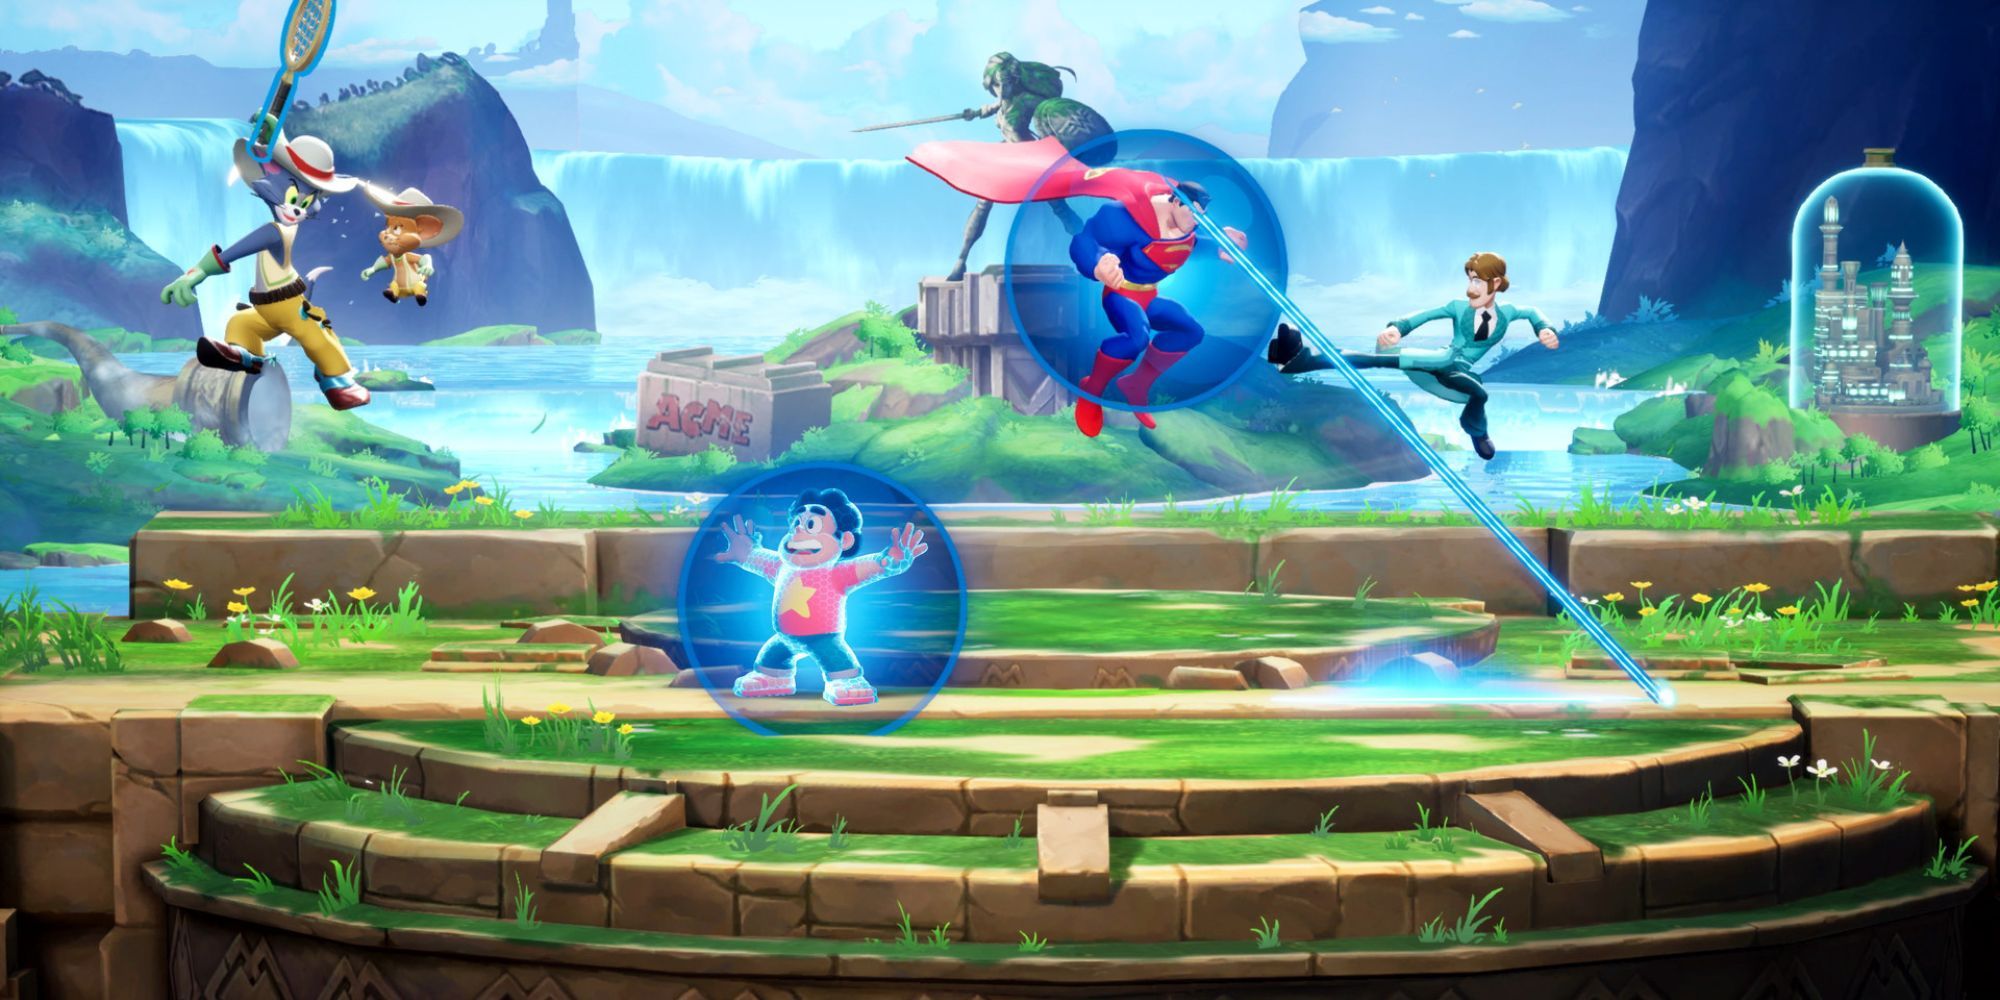 Steven Universe blocks an attack from Tom and Jerry while Superman attacks Shaggy